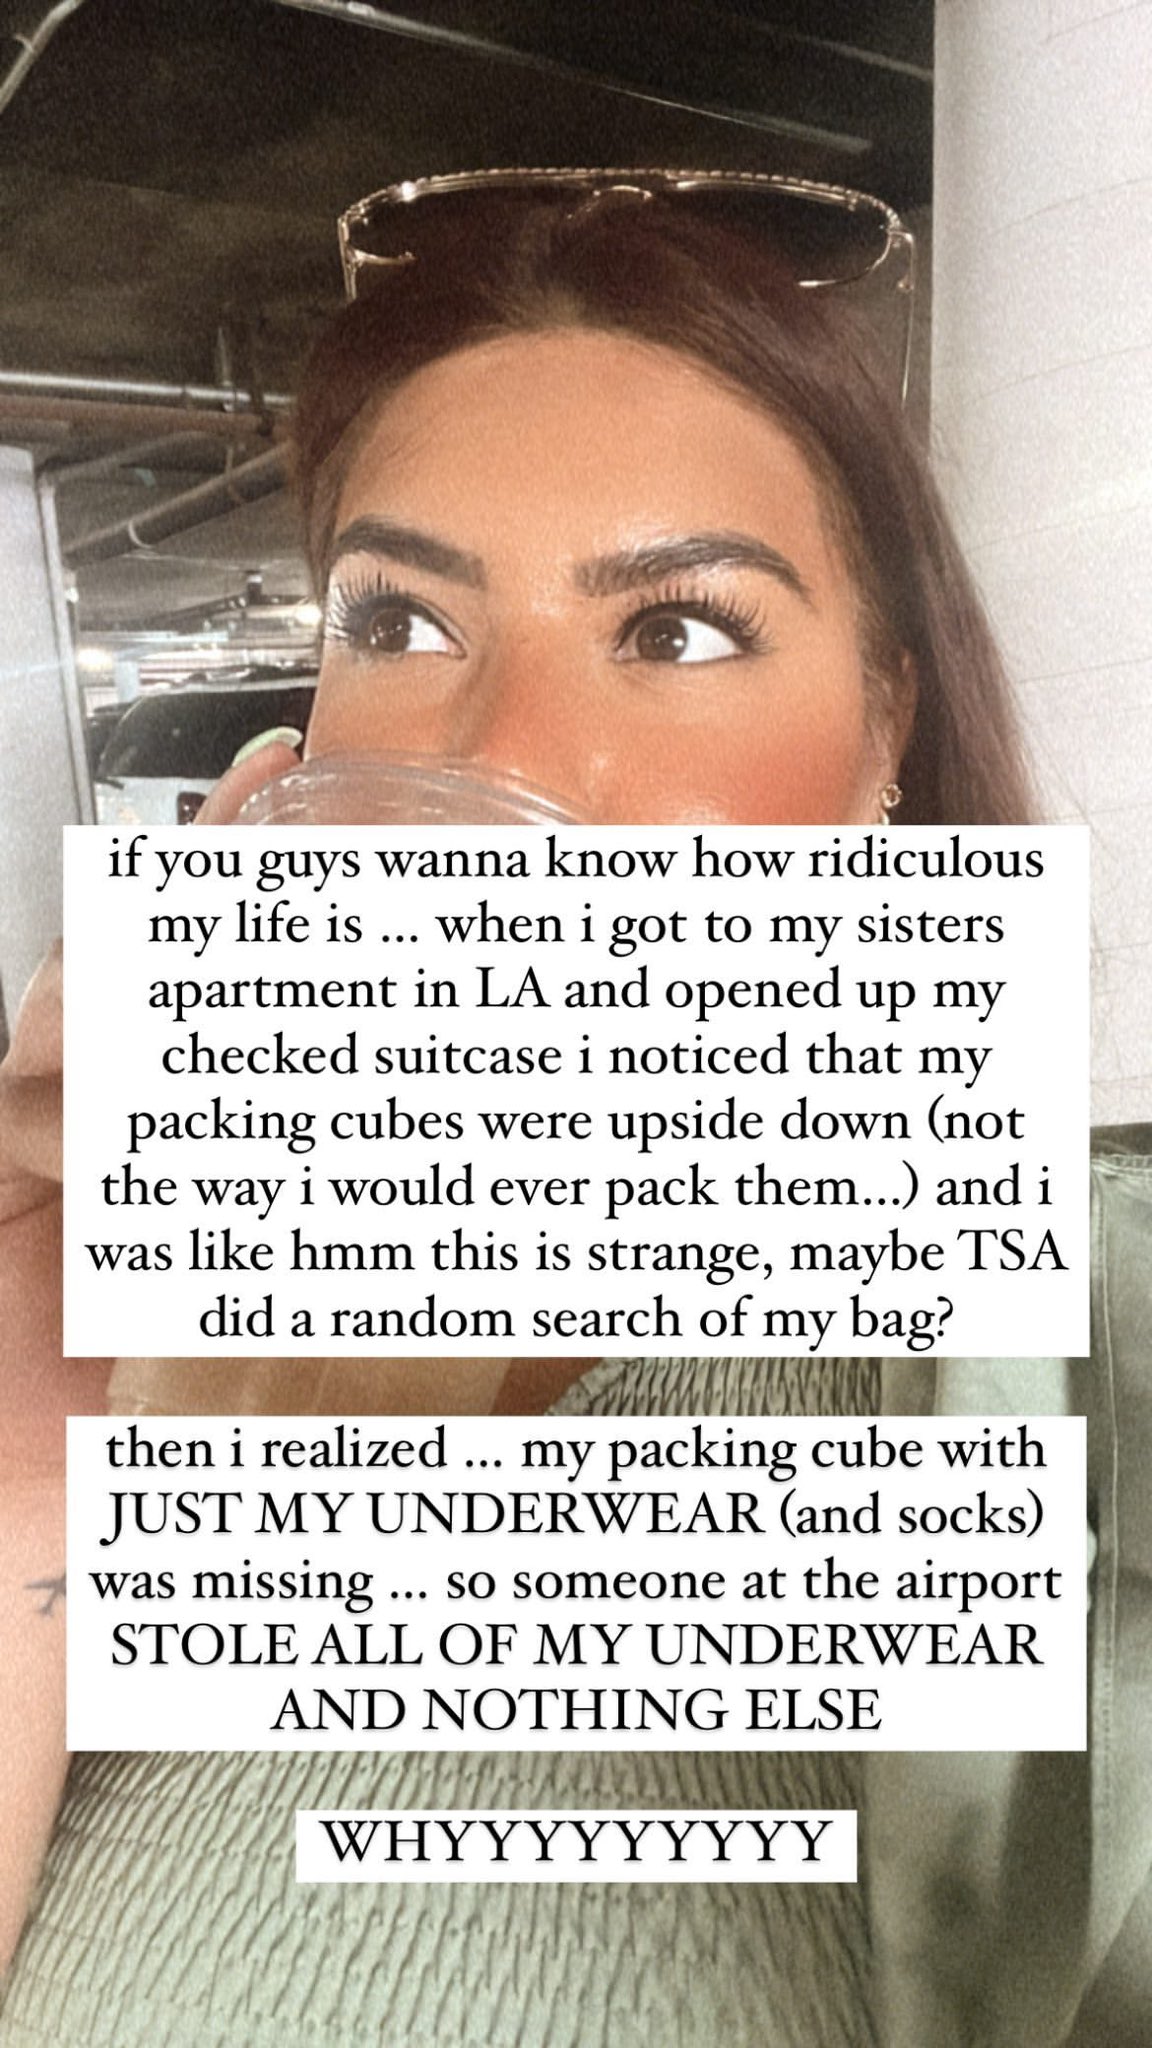 Naz on X: umm hello @Delta i flew from JFK to LAX on friday and when i got  to LA and opened my suitcase ALL OF MY PANTIES HAD BEEN STOLEN out